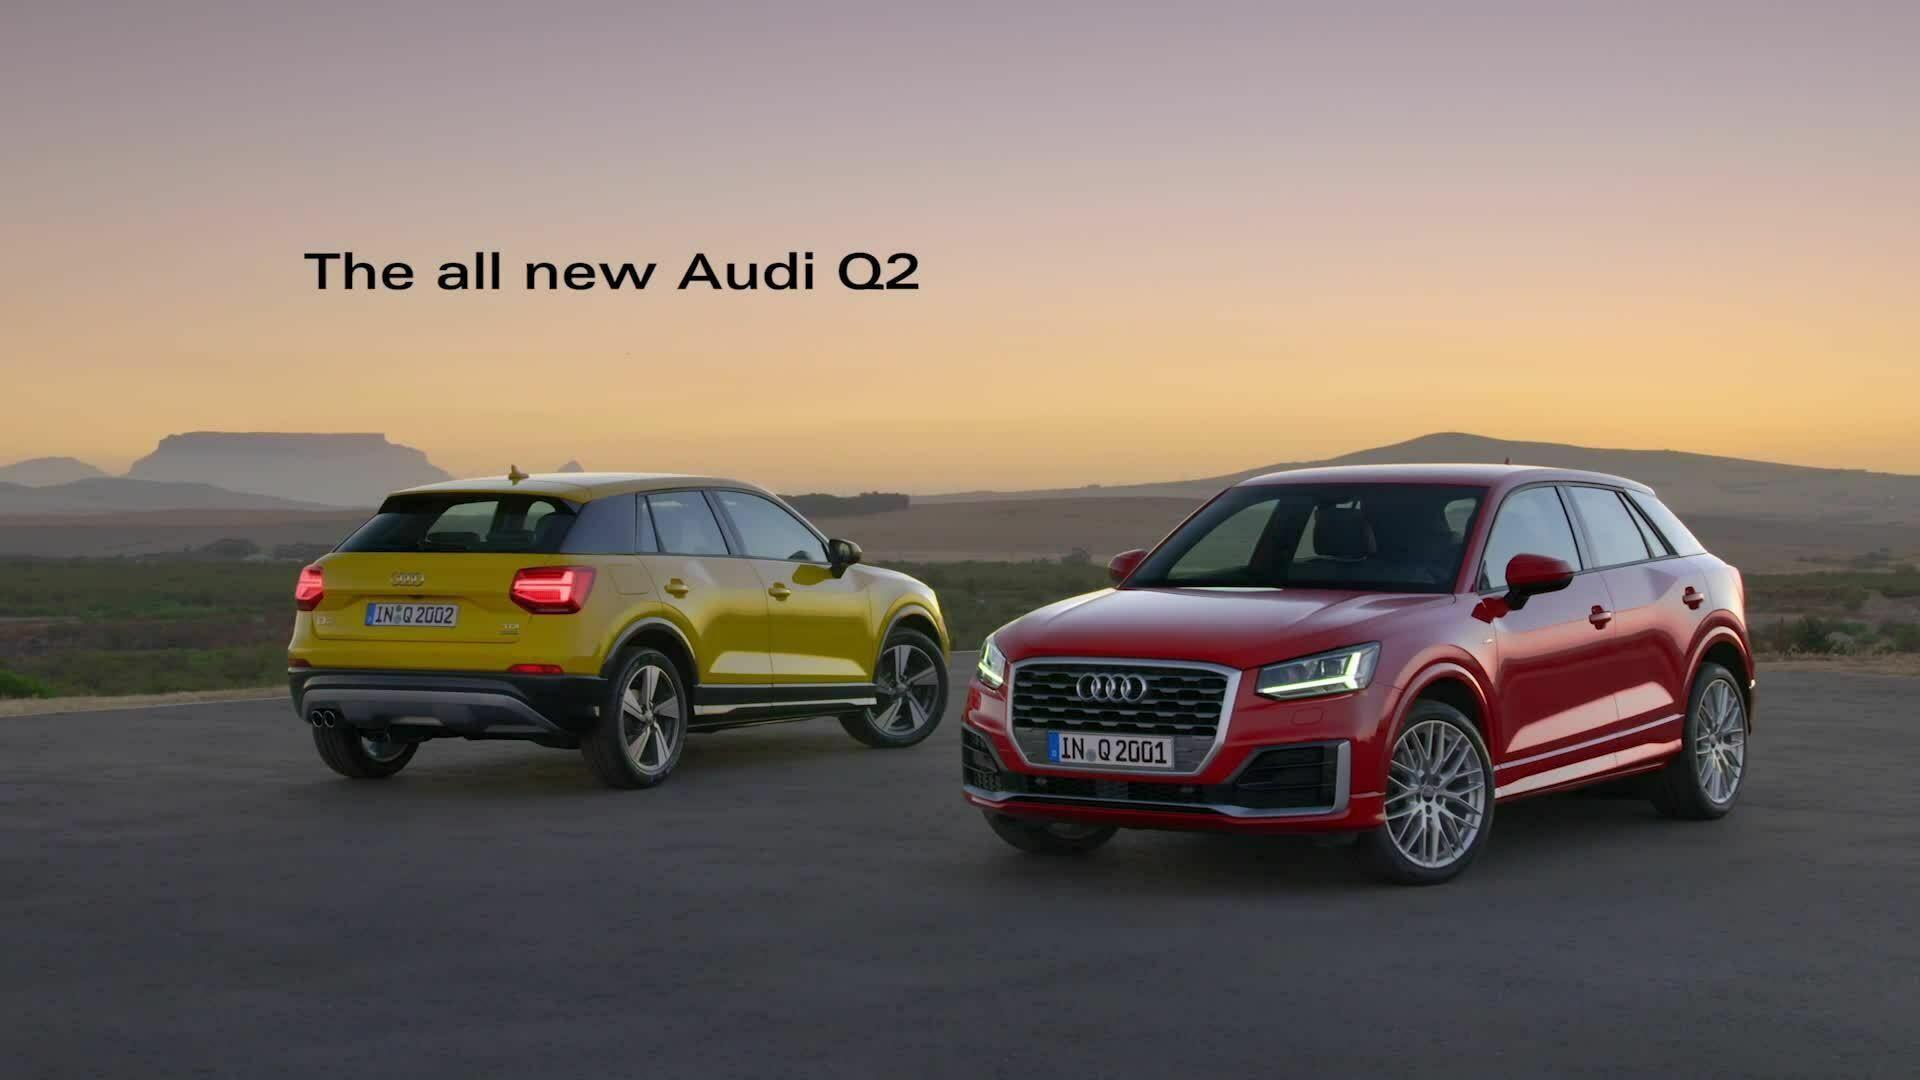 The compact city SUV - The new Audi Q2